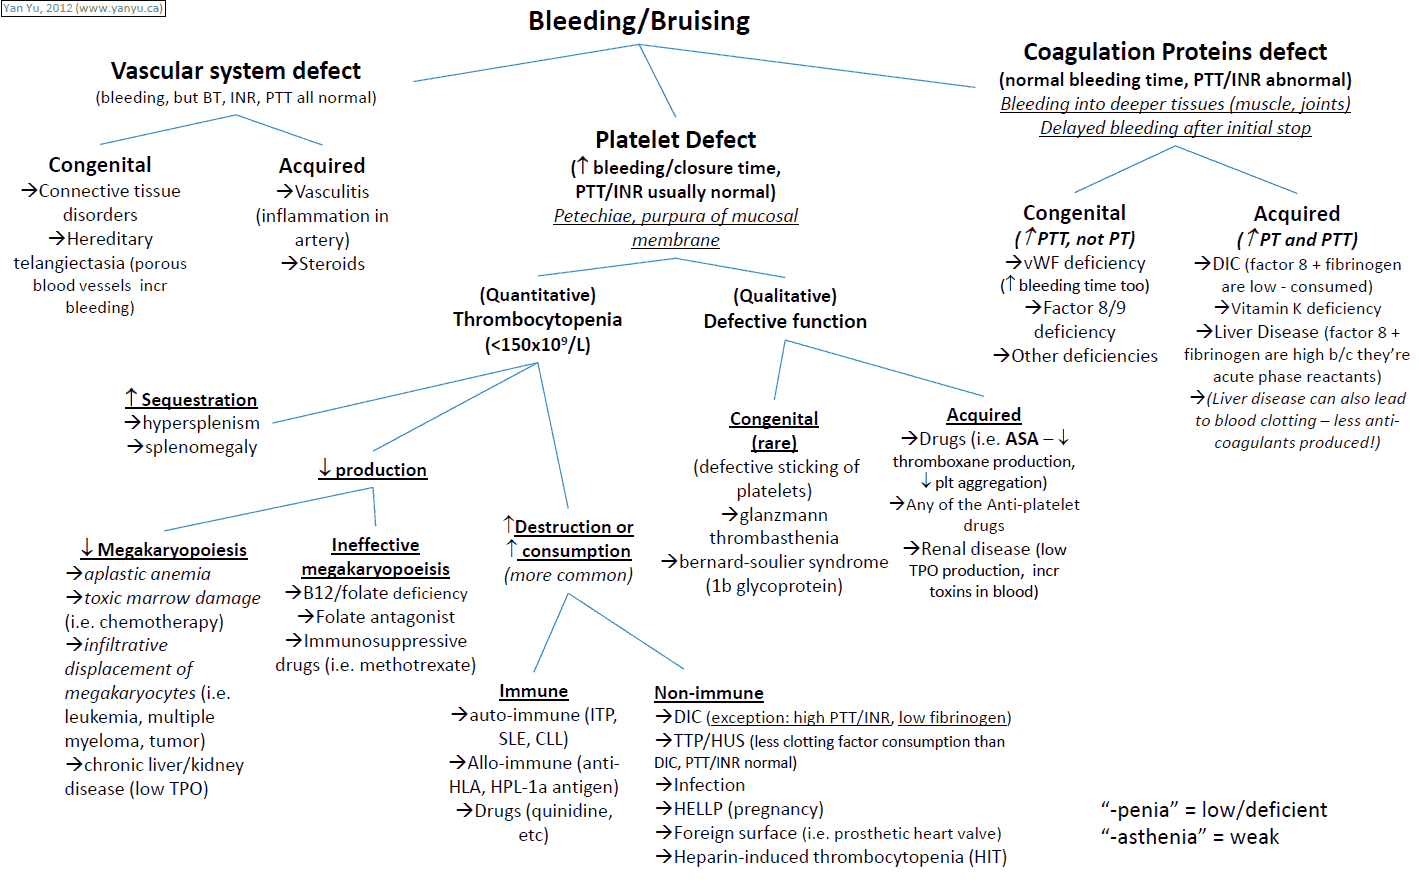 Differential Diagnosis for Bleeding and Bruising